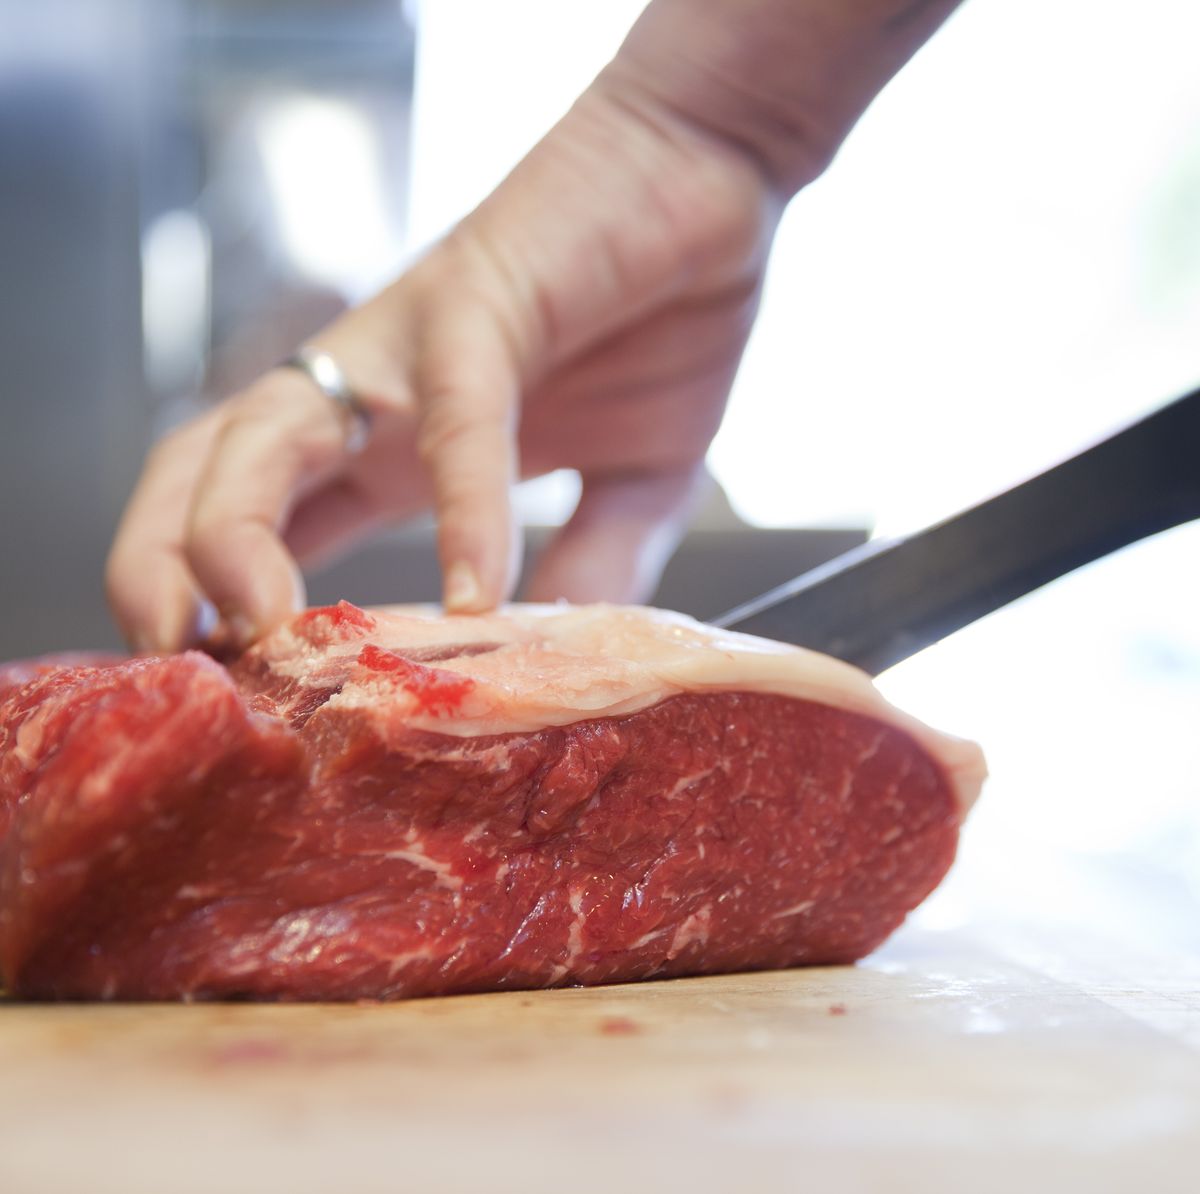 Close up of butchers hands slicing raw steak on butchers block